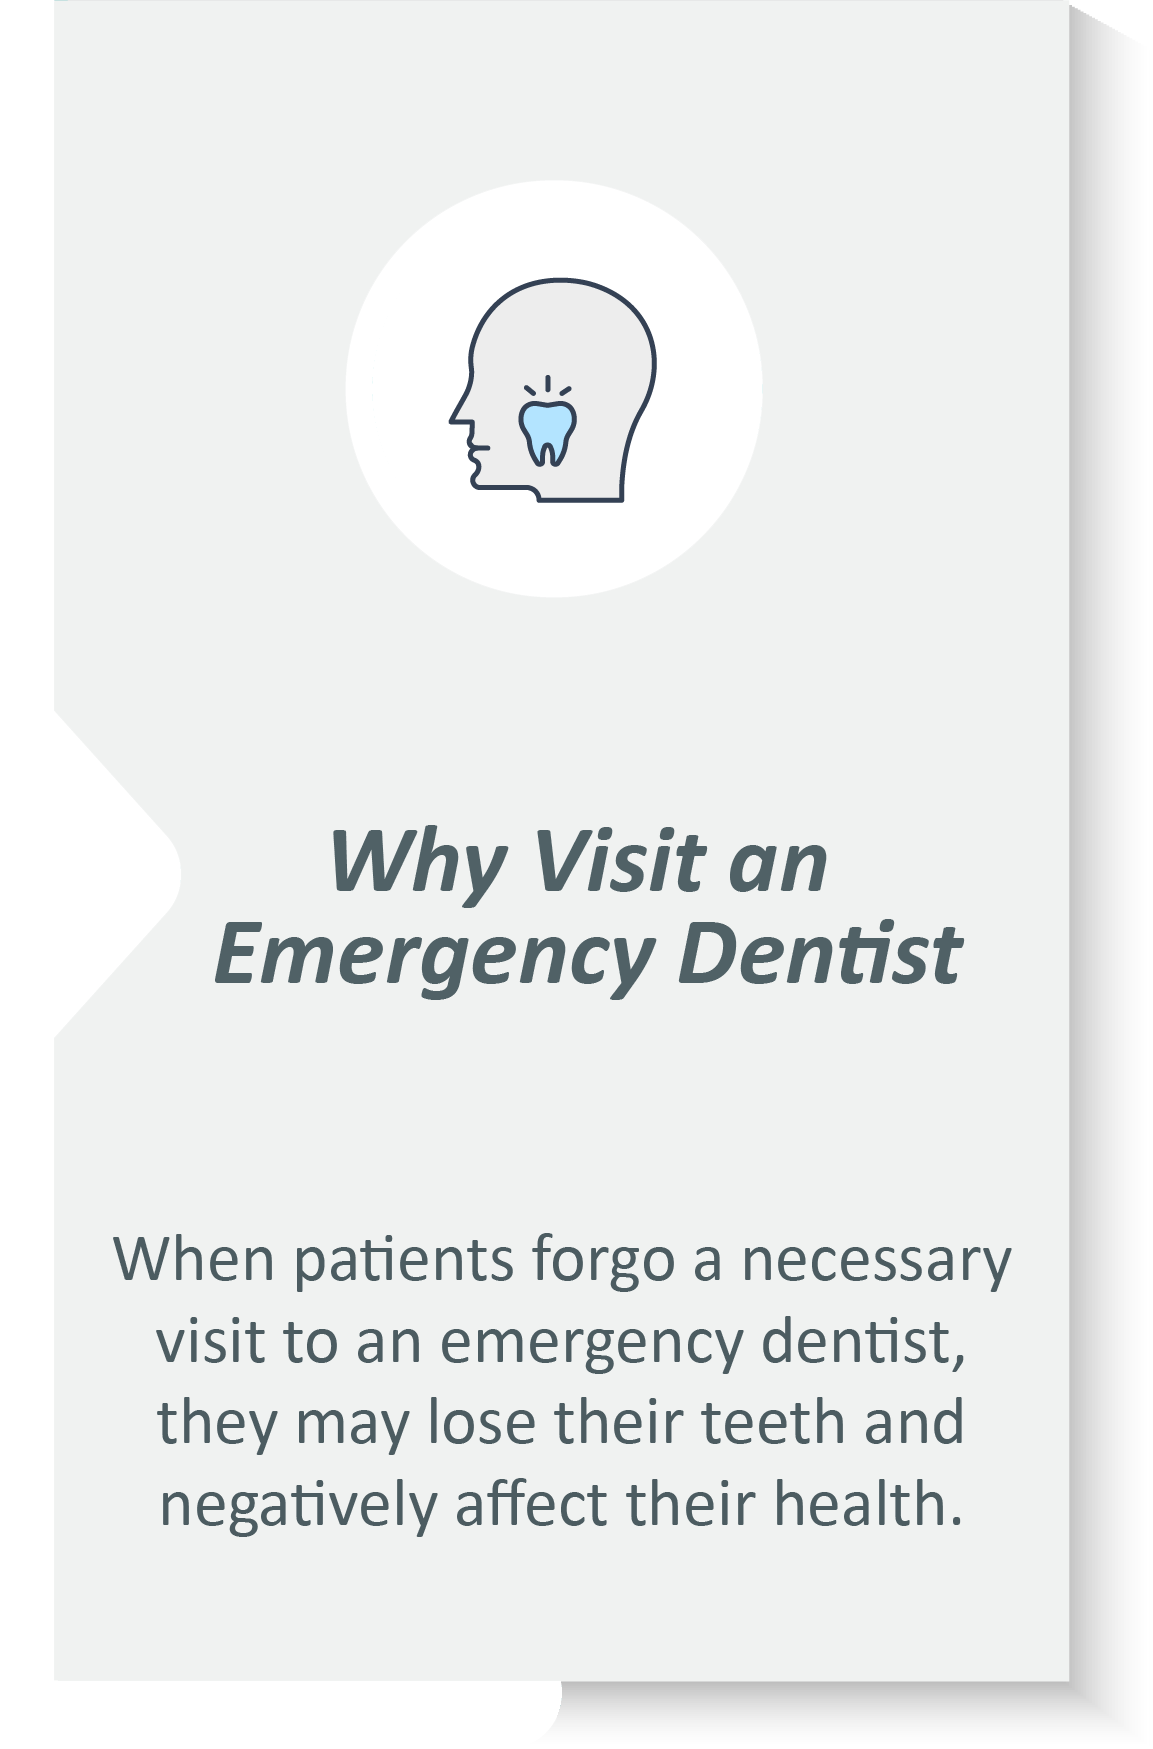 Emergency dentist infographic: When patients forgo a necessary visit to an emergency dentist, they may lose their teeth and negatively affect their health.